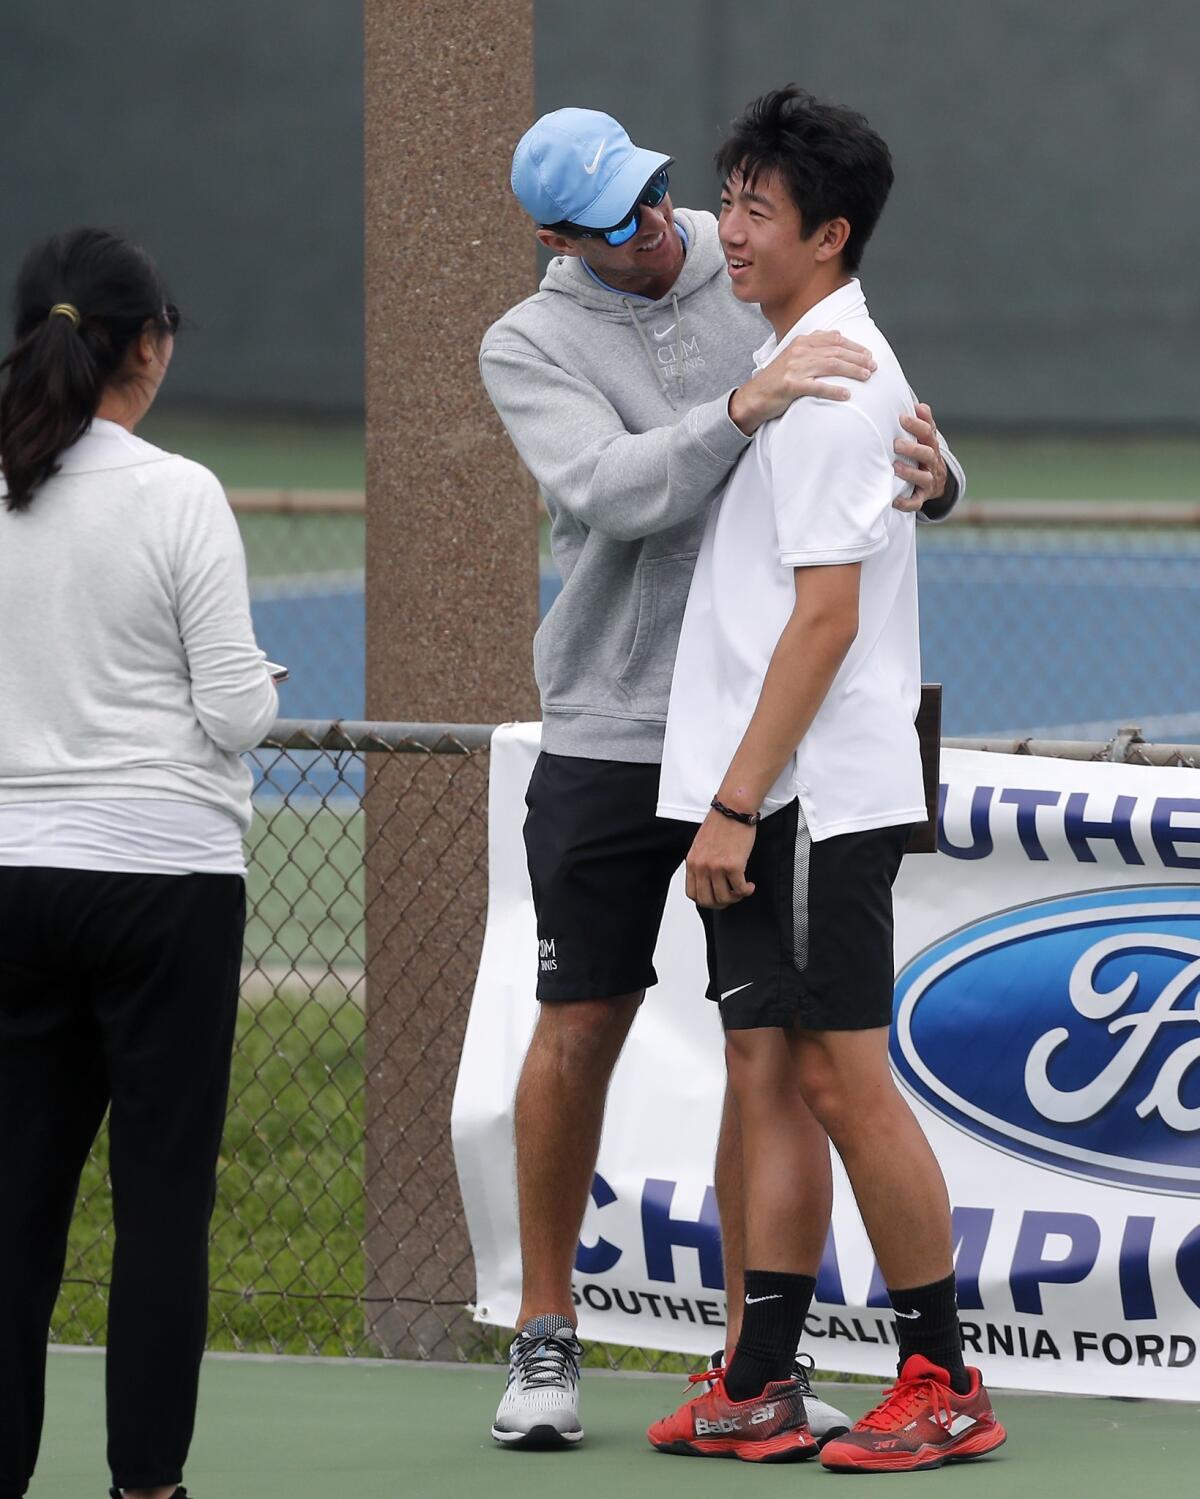 Corona del Mar coach Jamie Gresh, left, congratulates Kyle Pham, right, for his runner-up finish in the CIF Southern Section Individuals tournament on Thursday at Seal Beach Tennis Center.